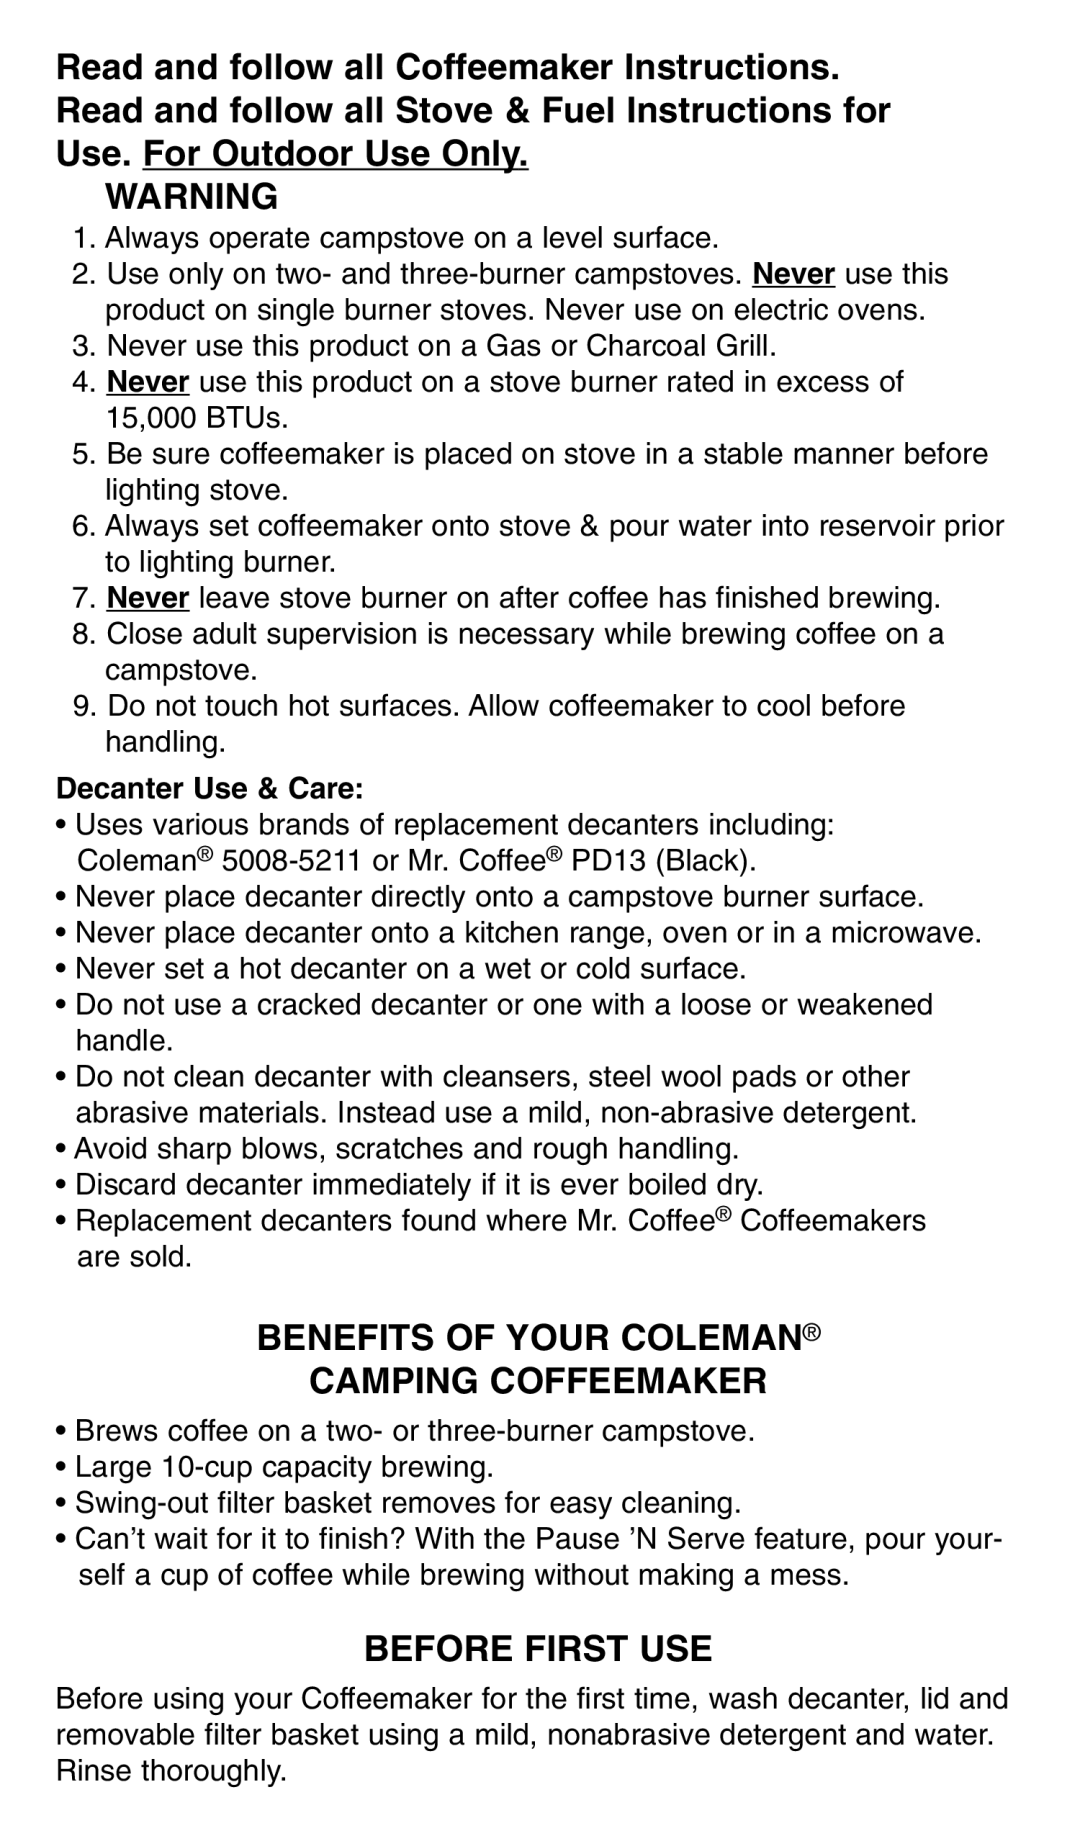 Coleman Model 5008-700 manual Benefits Of Your Coleman Camping Coffeemaker, Before First Use, Decanter Use & Care 